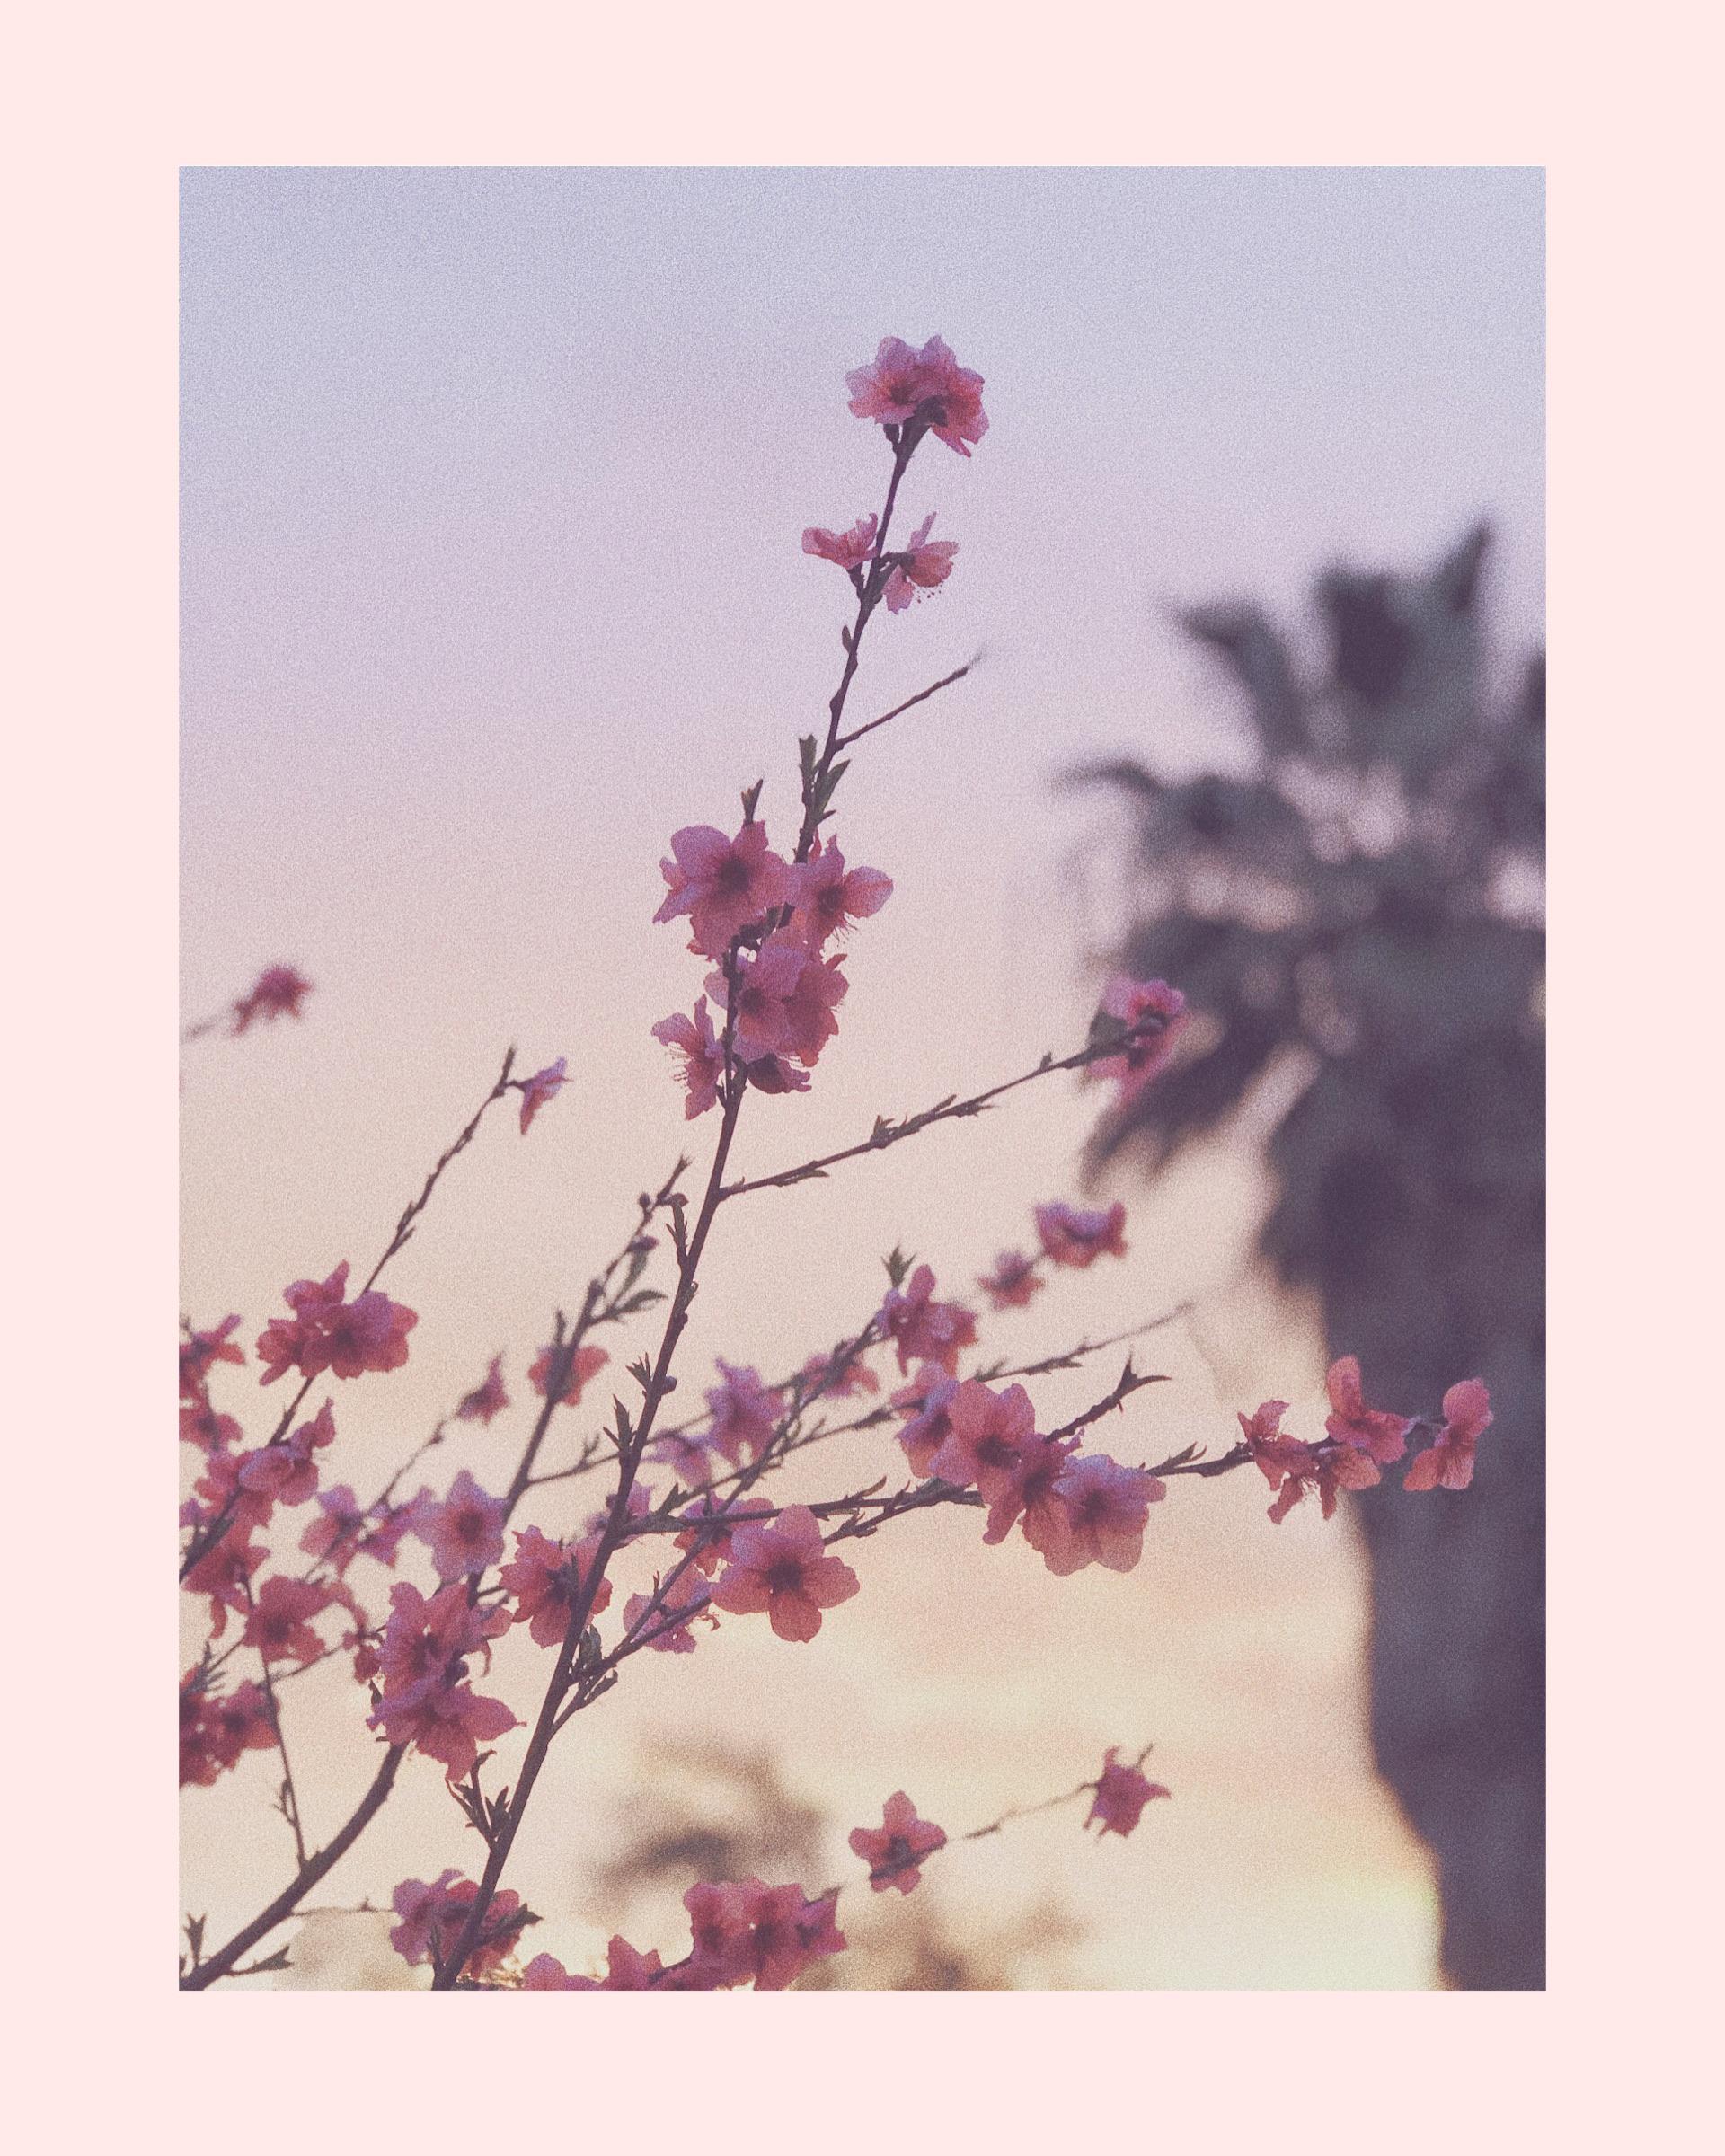 A pink flowered tree in front of a palm tree - Cherry blossom